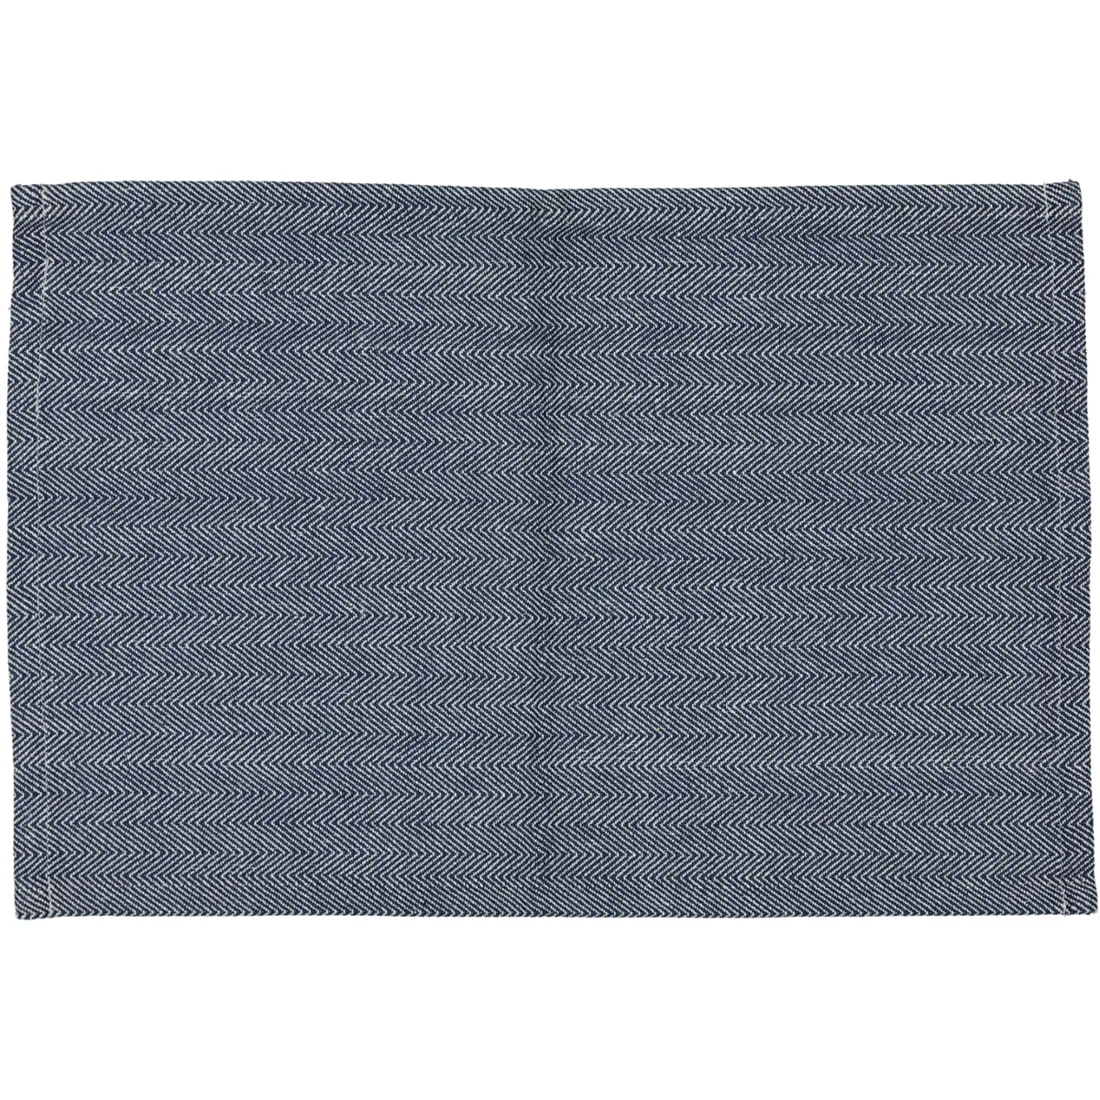 Fabric Placemat | Home | PEP